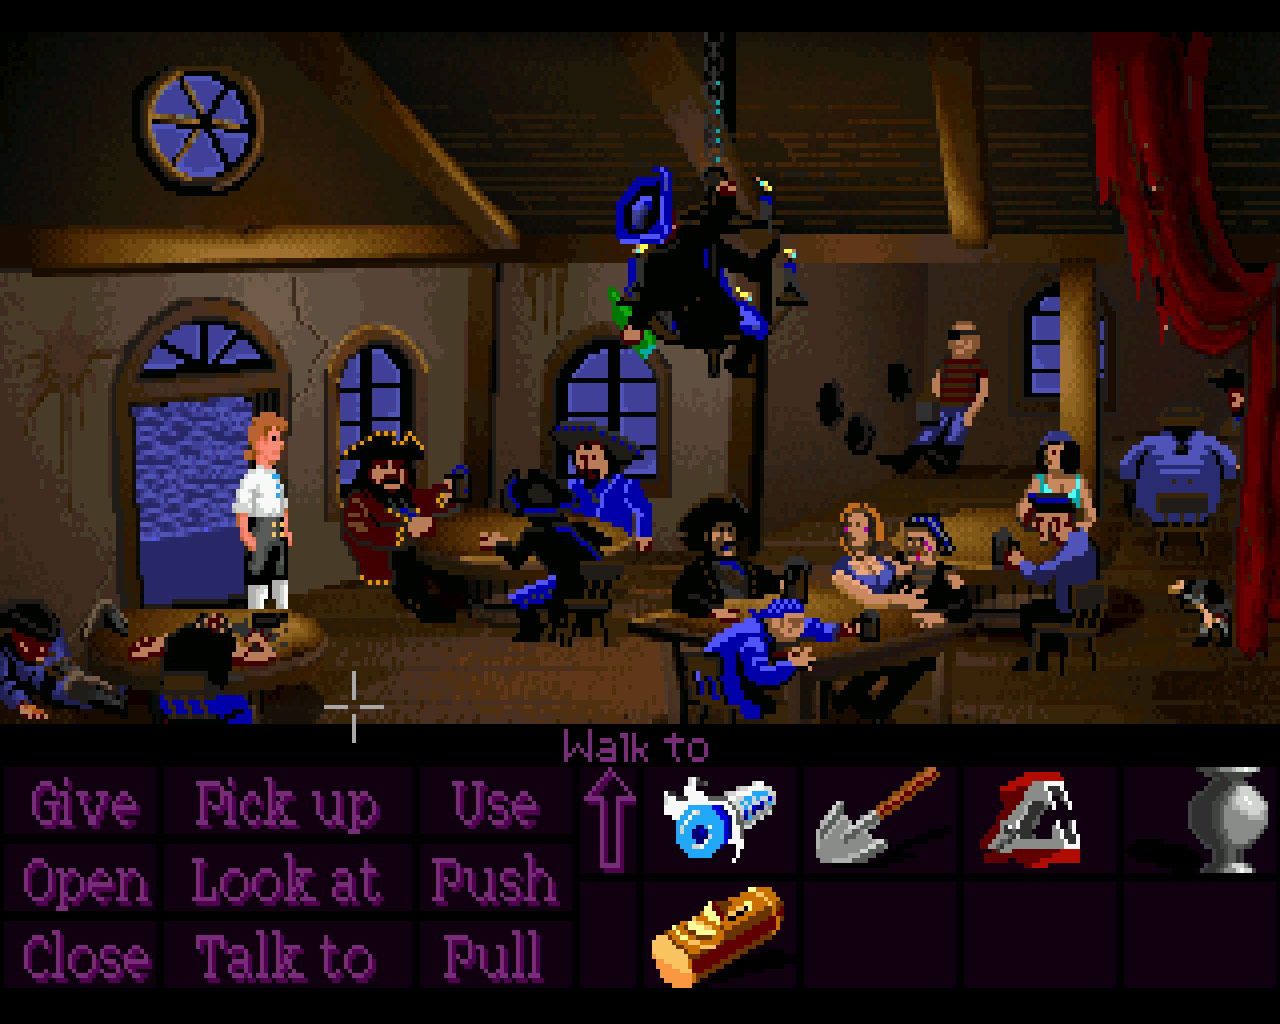 Guybrush Threepwood meets his first pirates in The Secret of Monkey Island.